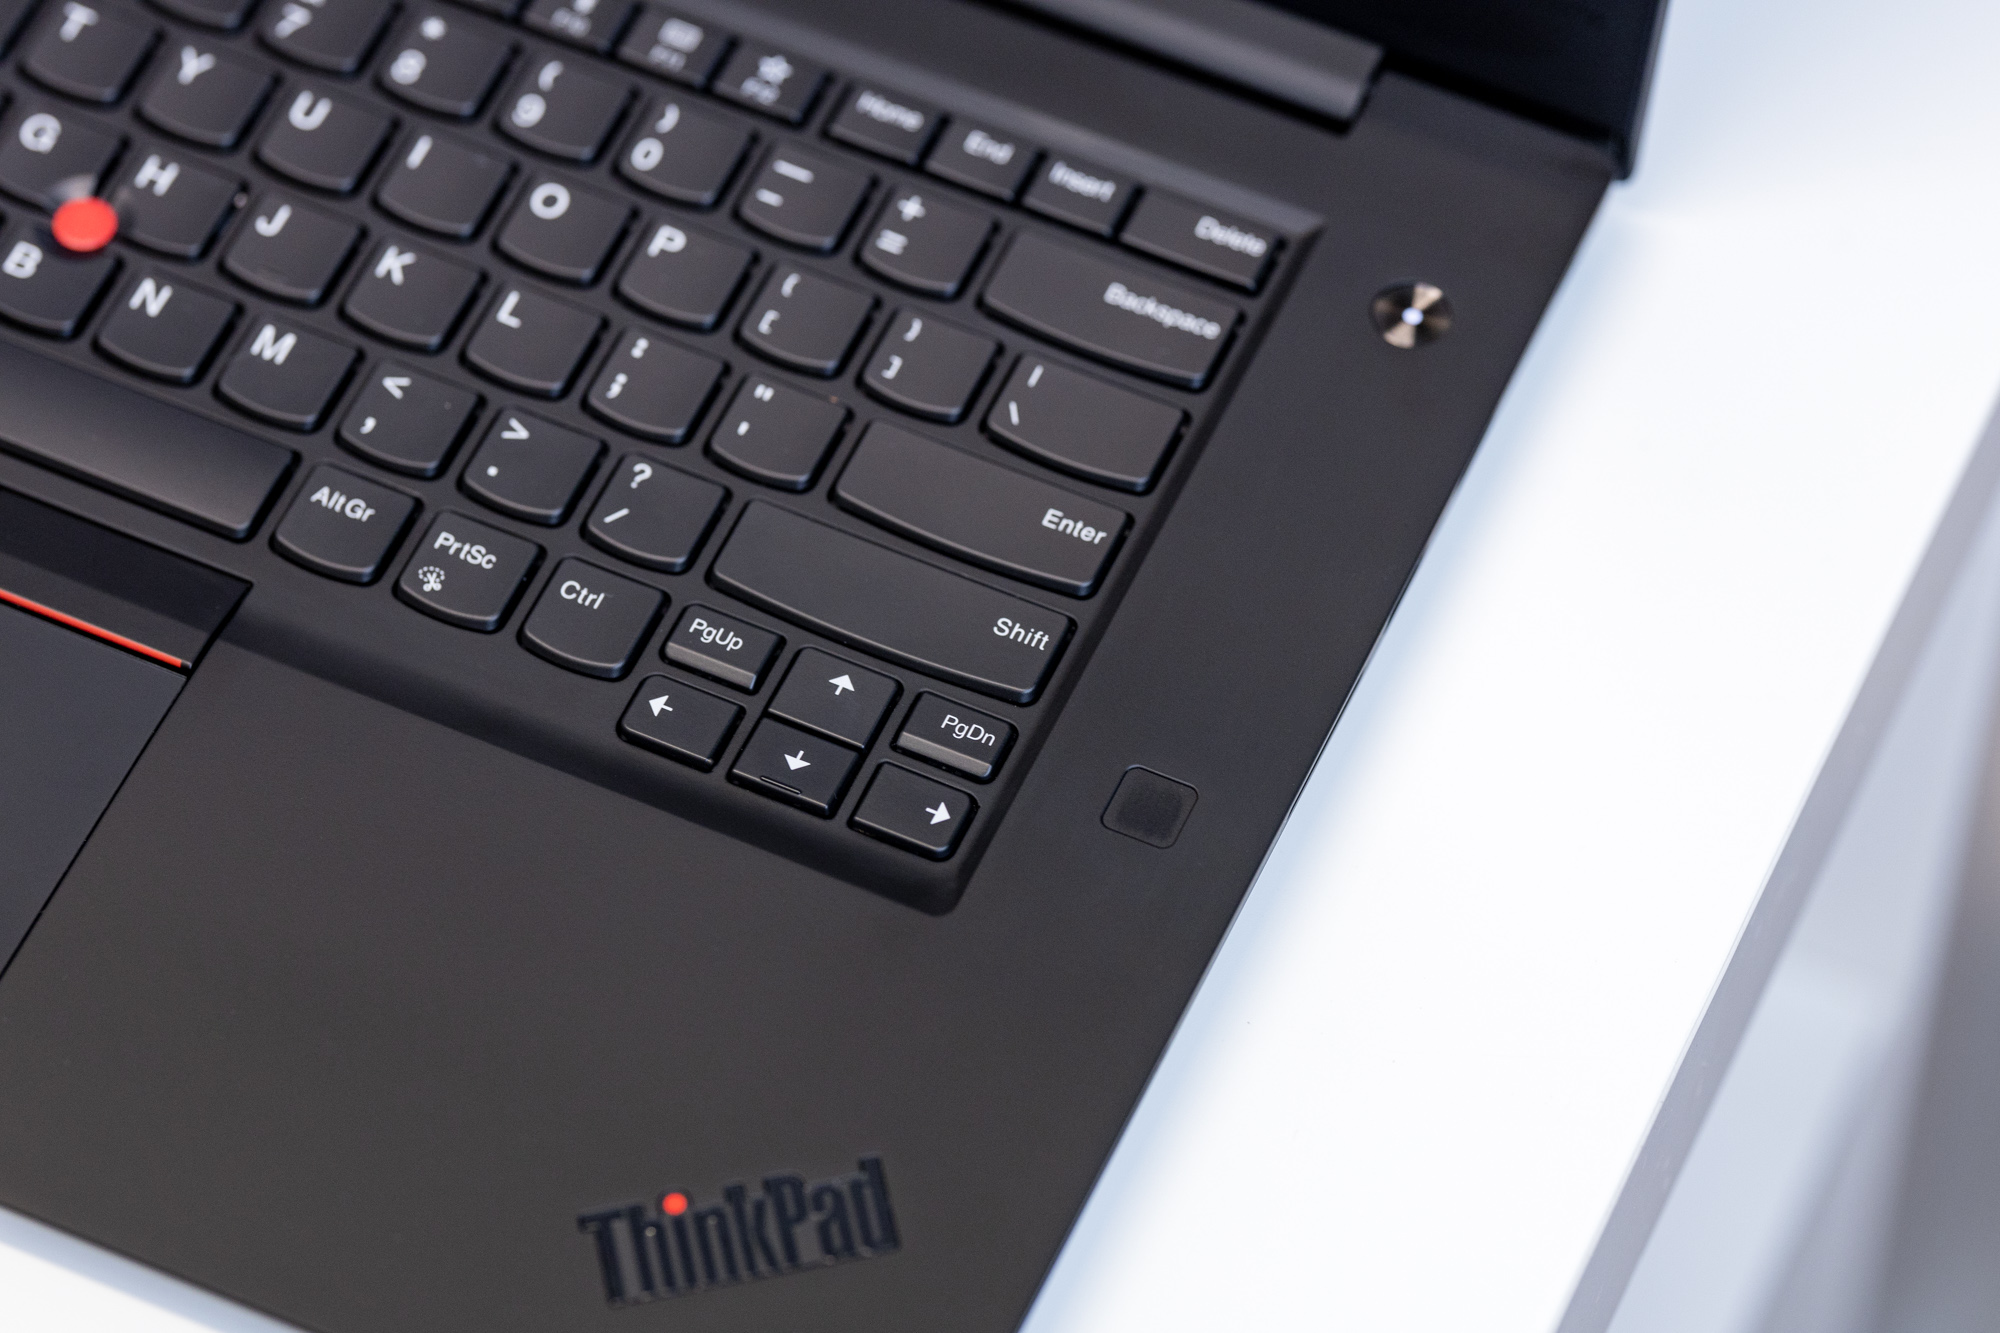 Lenovo ThinkPad X1 Extreme Gen 2: A multimedia laptop that may not 